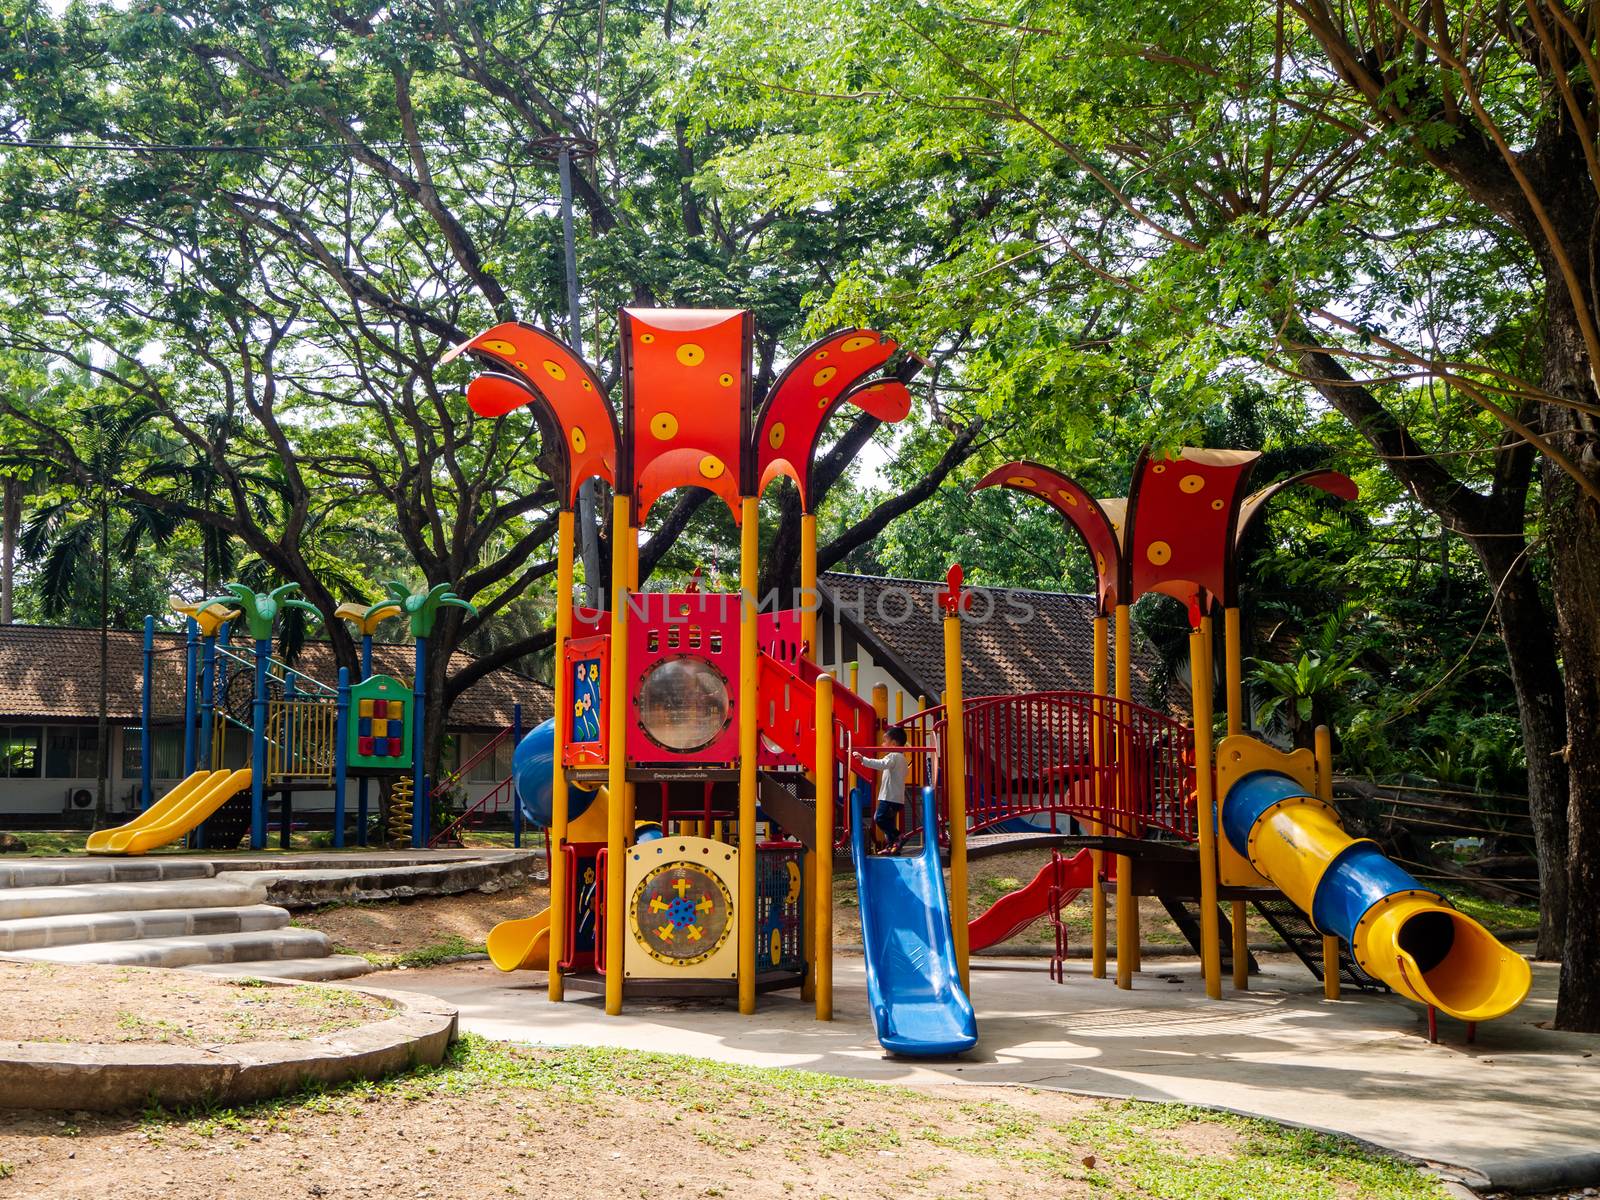 The Colorful playground on yard in the park.